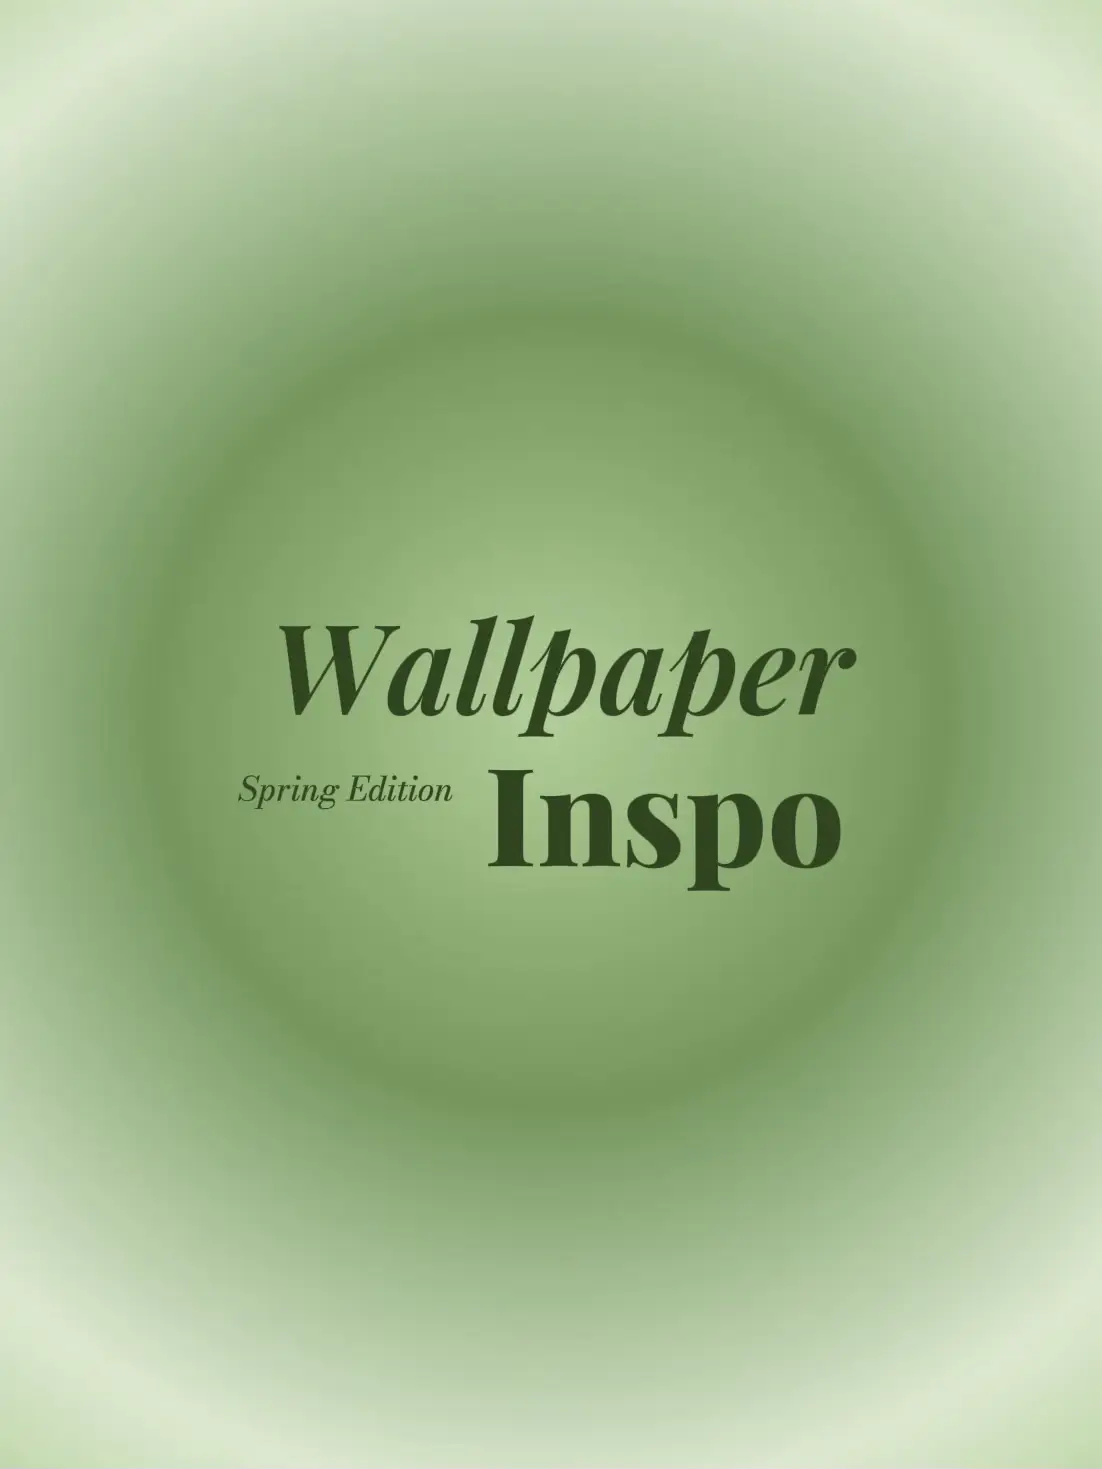  A green background with the words "wallpaper" and "inspire" written on it.